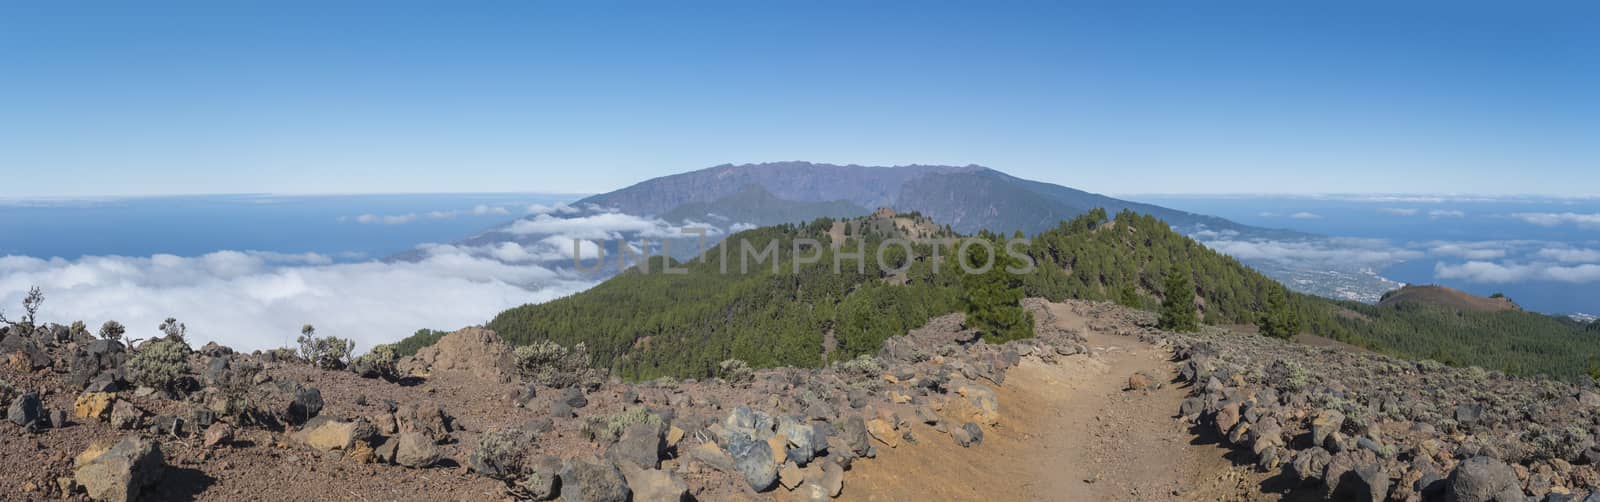 Panoramatic view of volcanic landscape with lush green pine trees, colorful volcanoes and white clouds at path Ruta de los Volcanes, hiking trail. La Palma, Canary Islands, Spain, Blue sky background by Henkeova